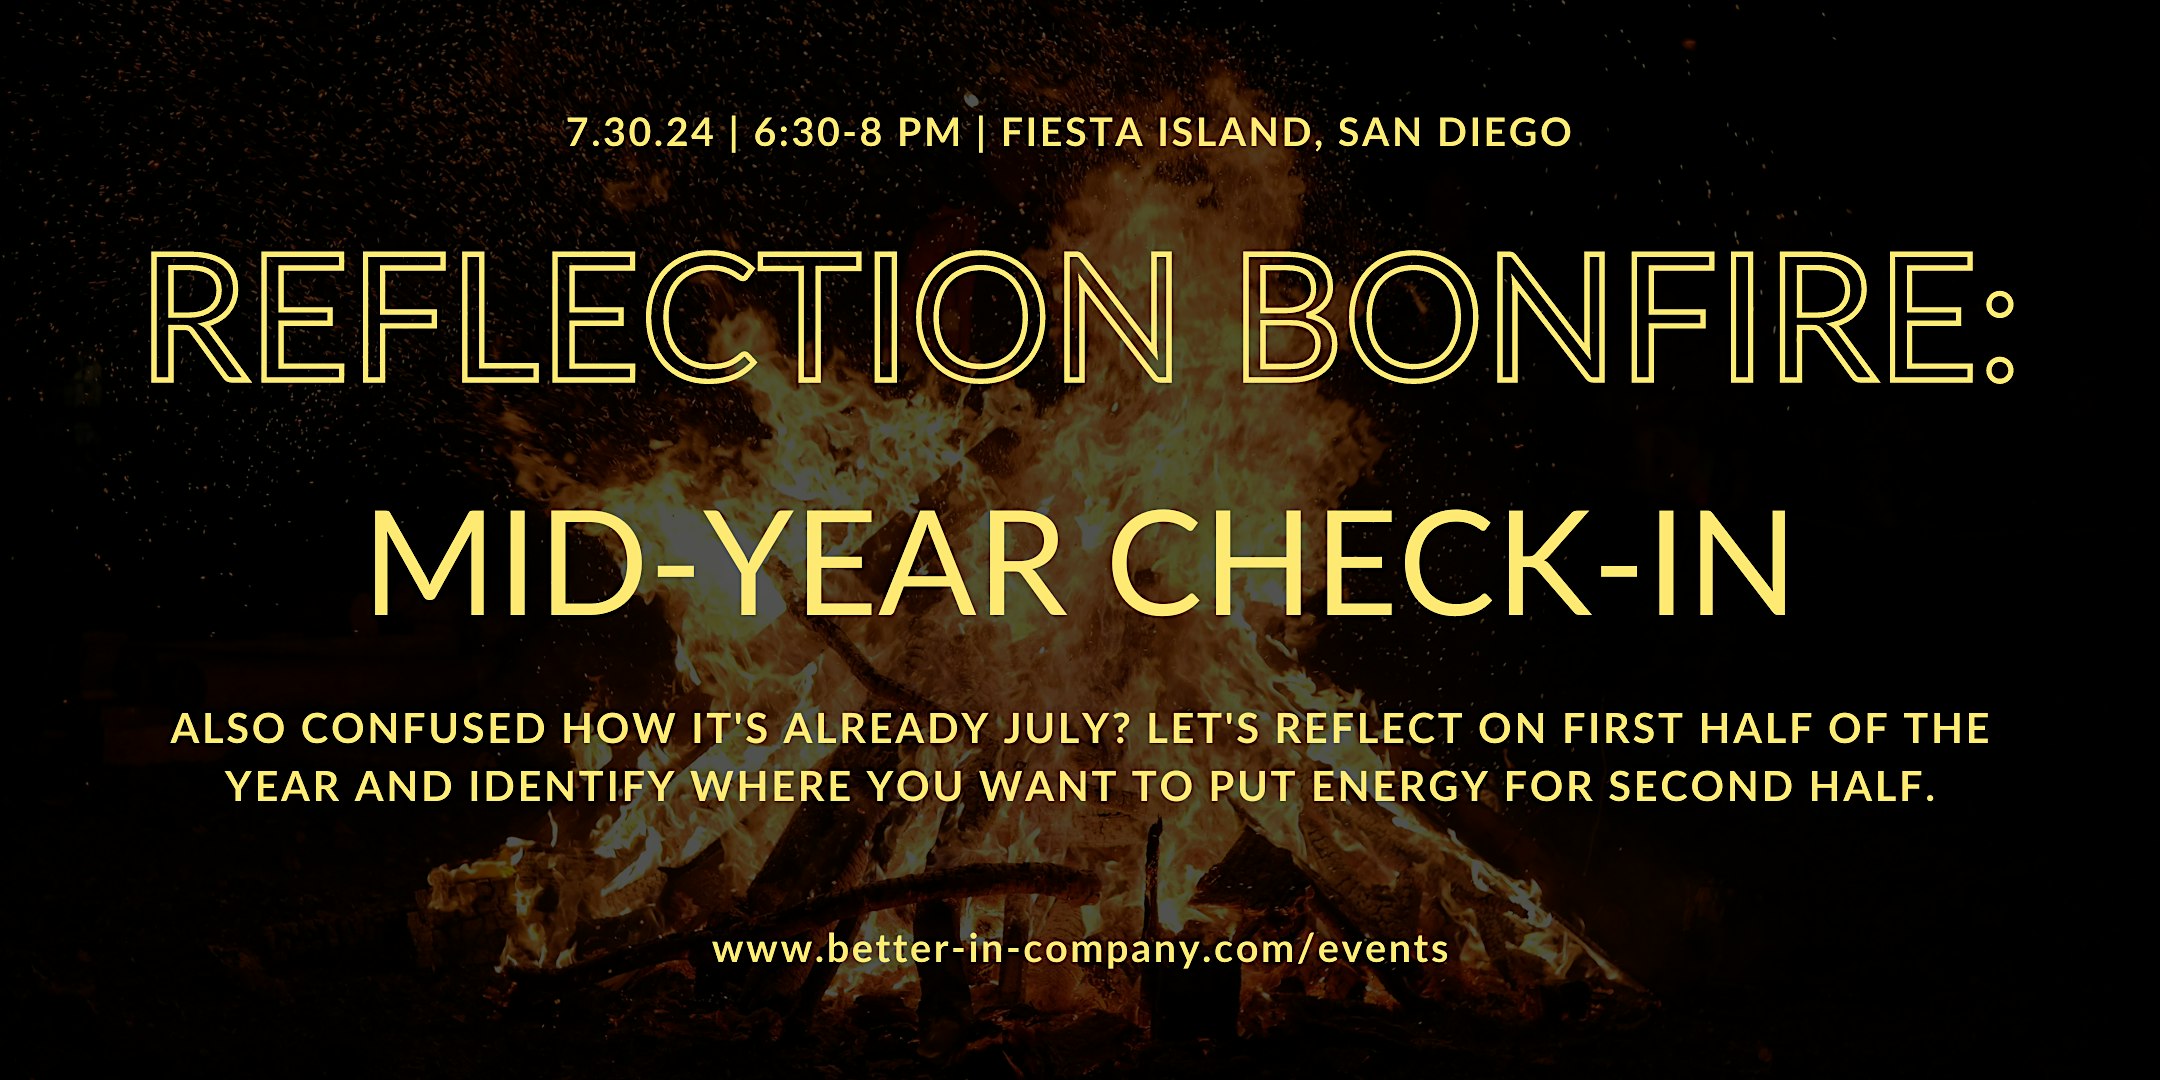 Reflection Bonfire: Mid-year check-in